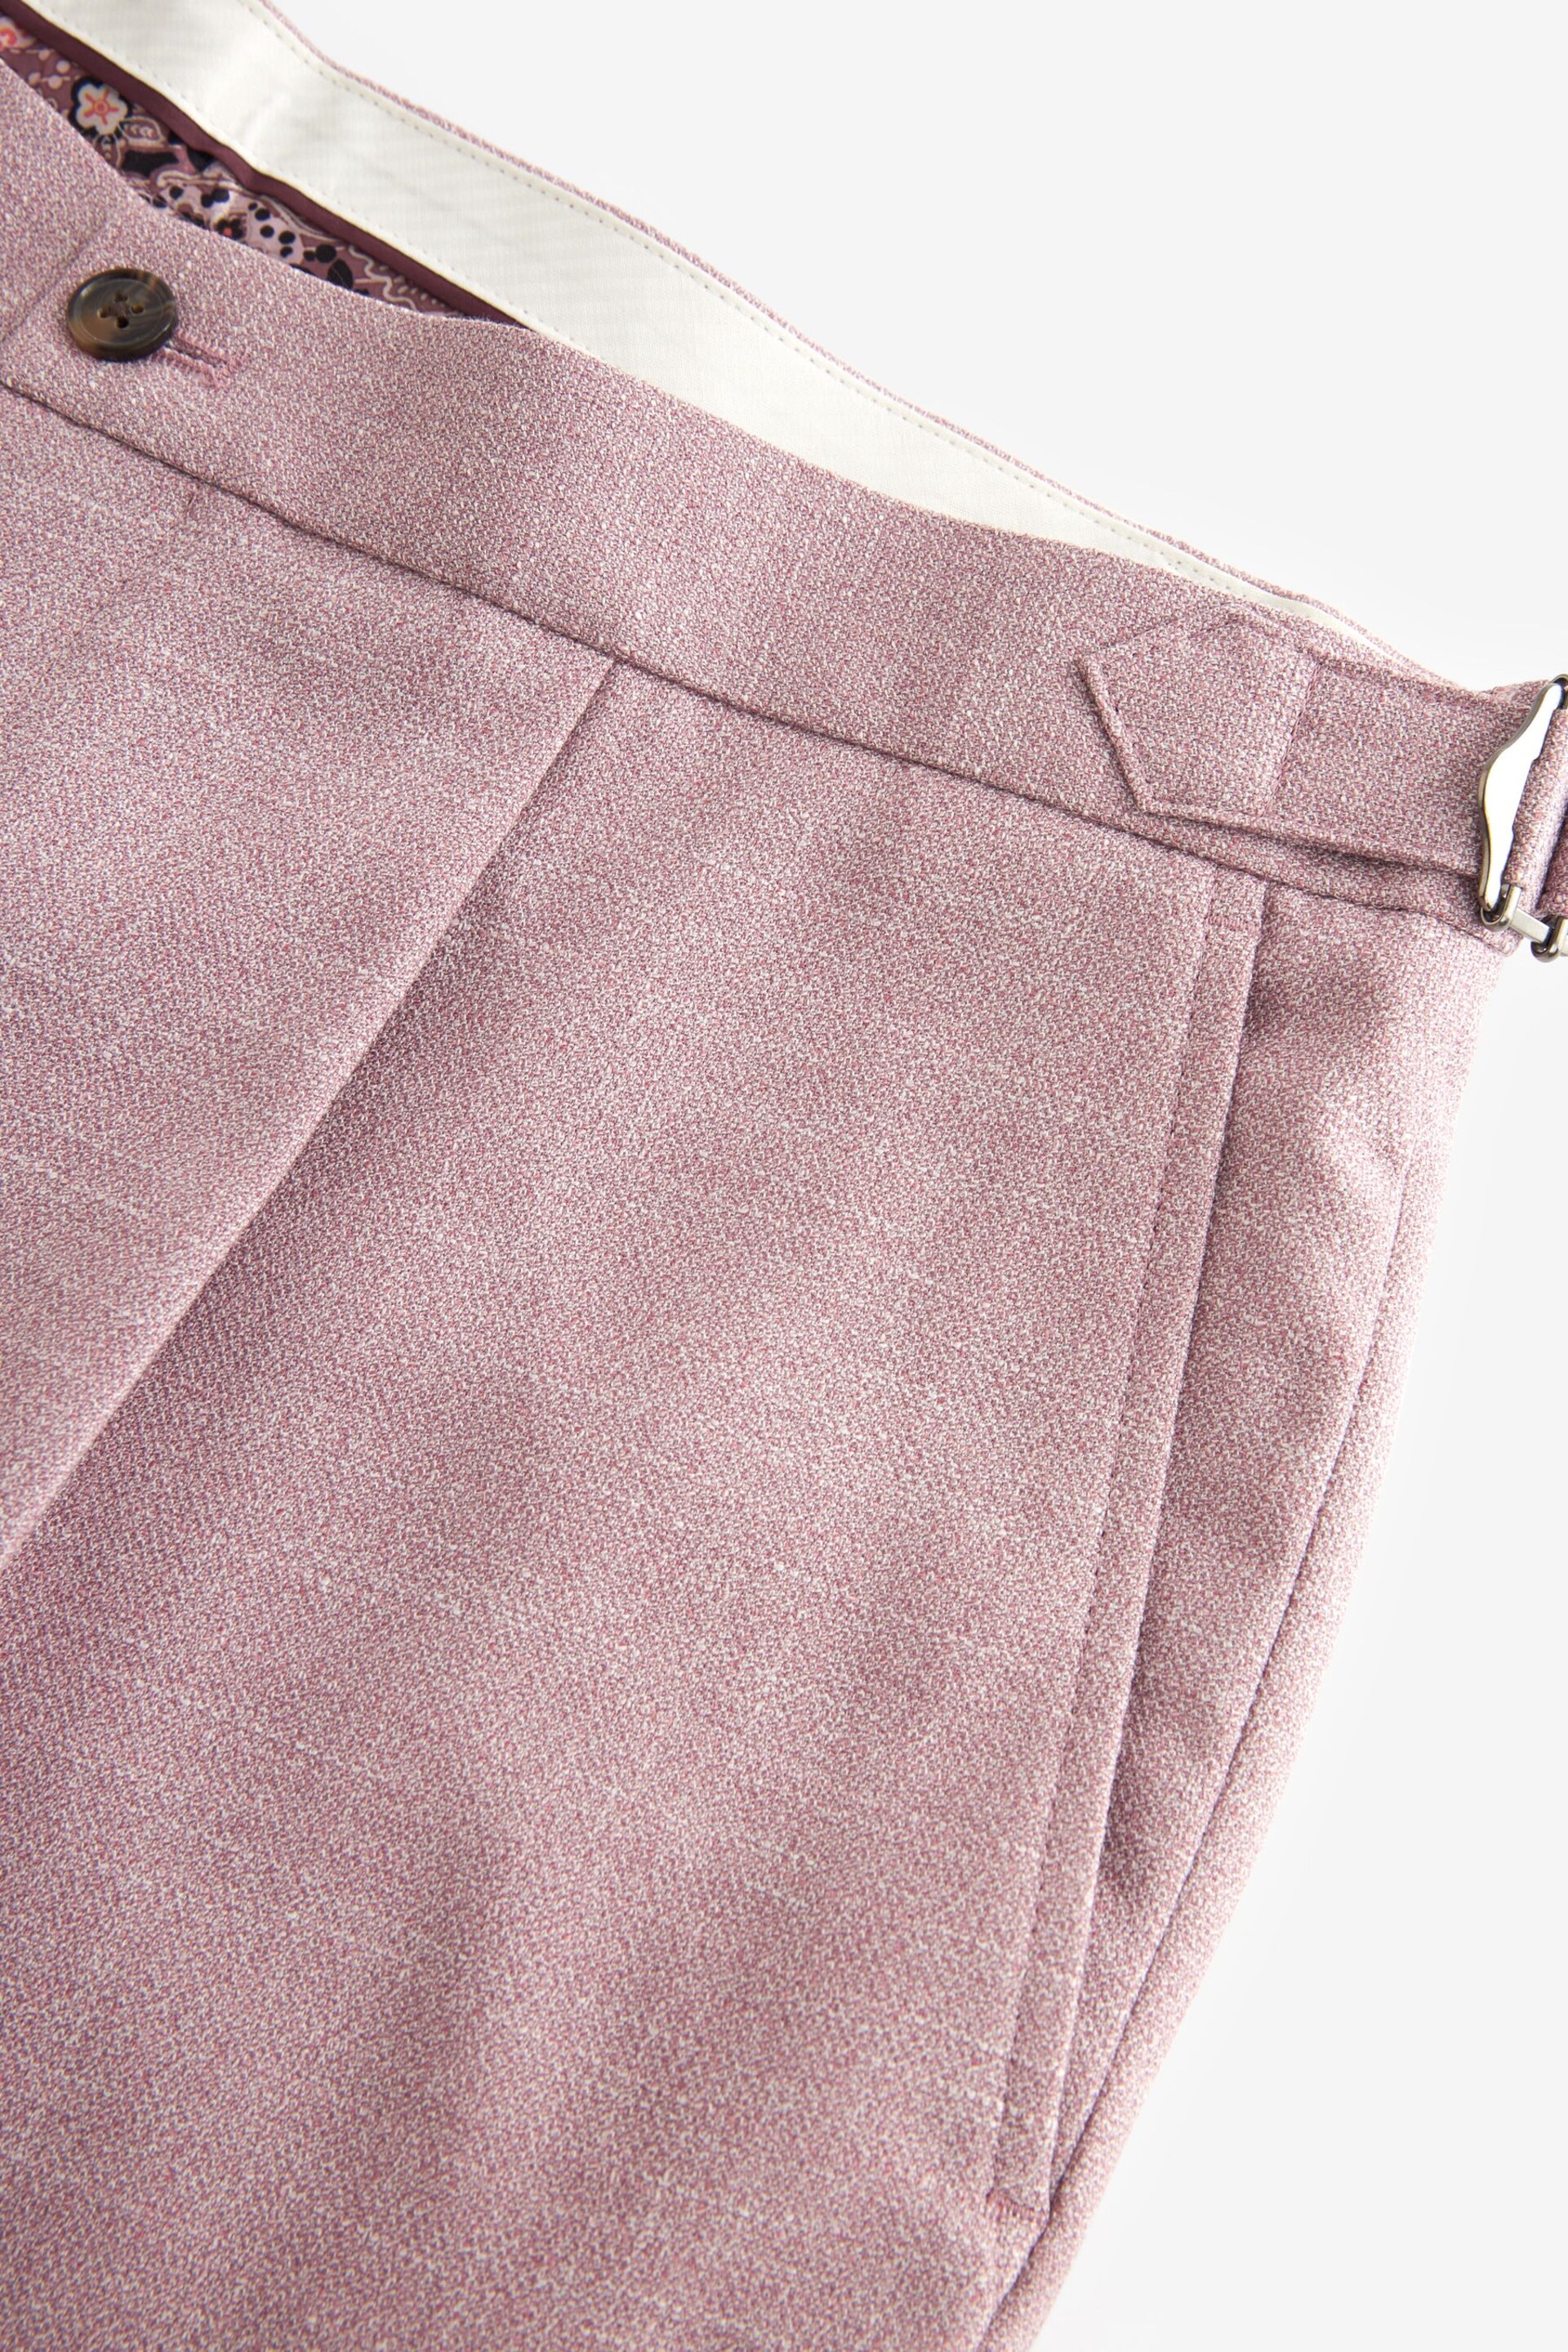 Pink Textured Side Adjuster Trousers - Image 6 of 8